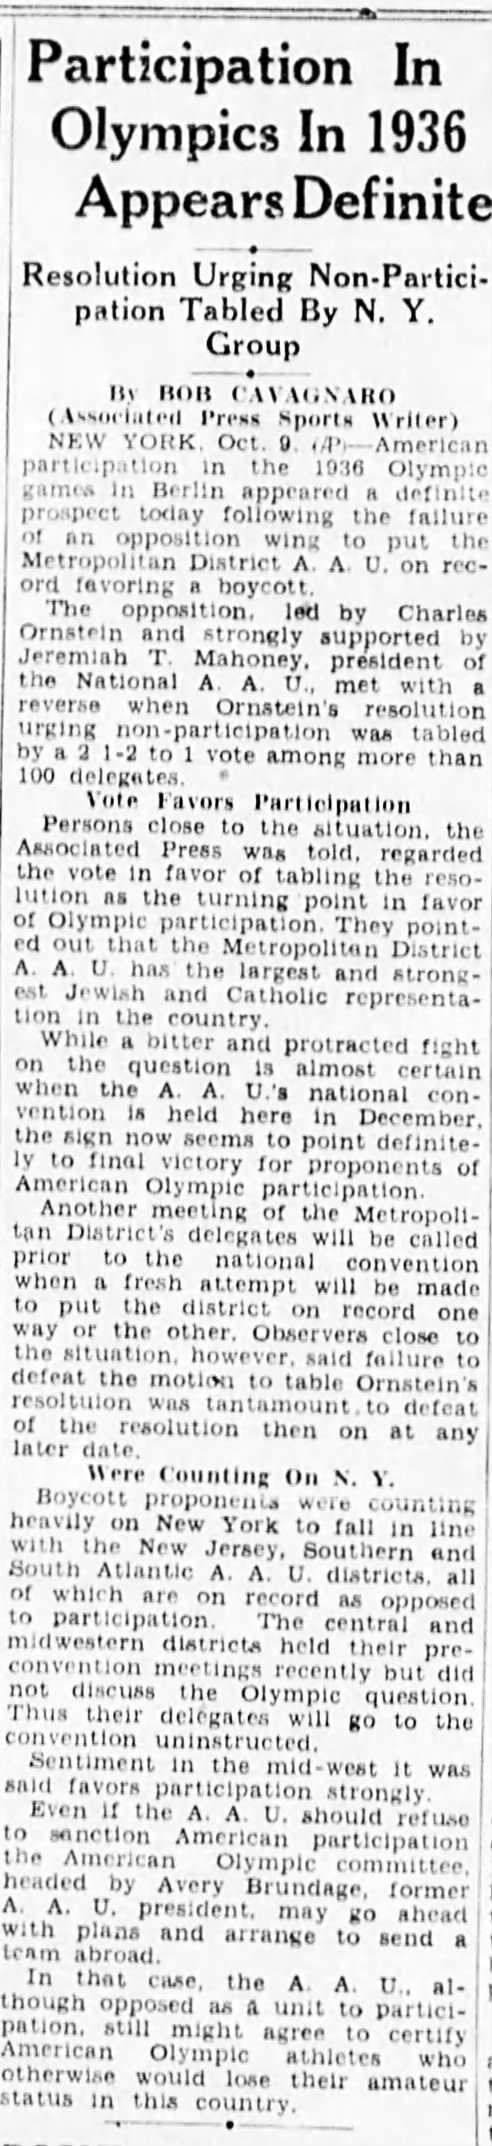 Participation In Olympics in 1936 Appears Definite